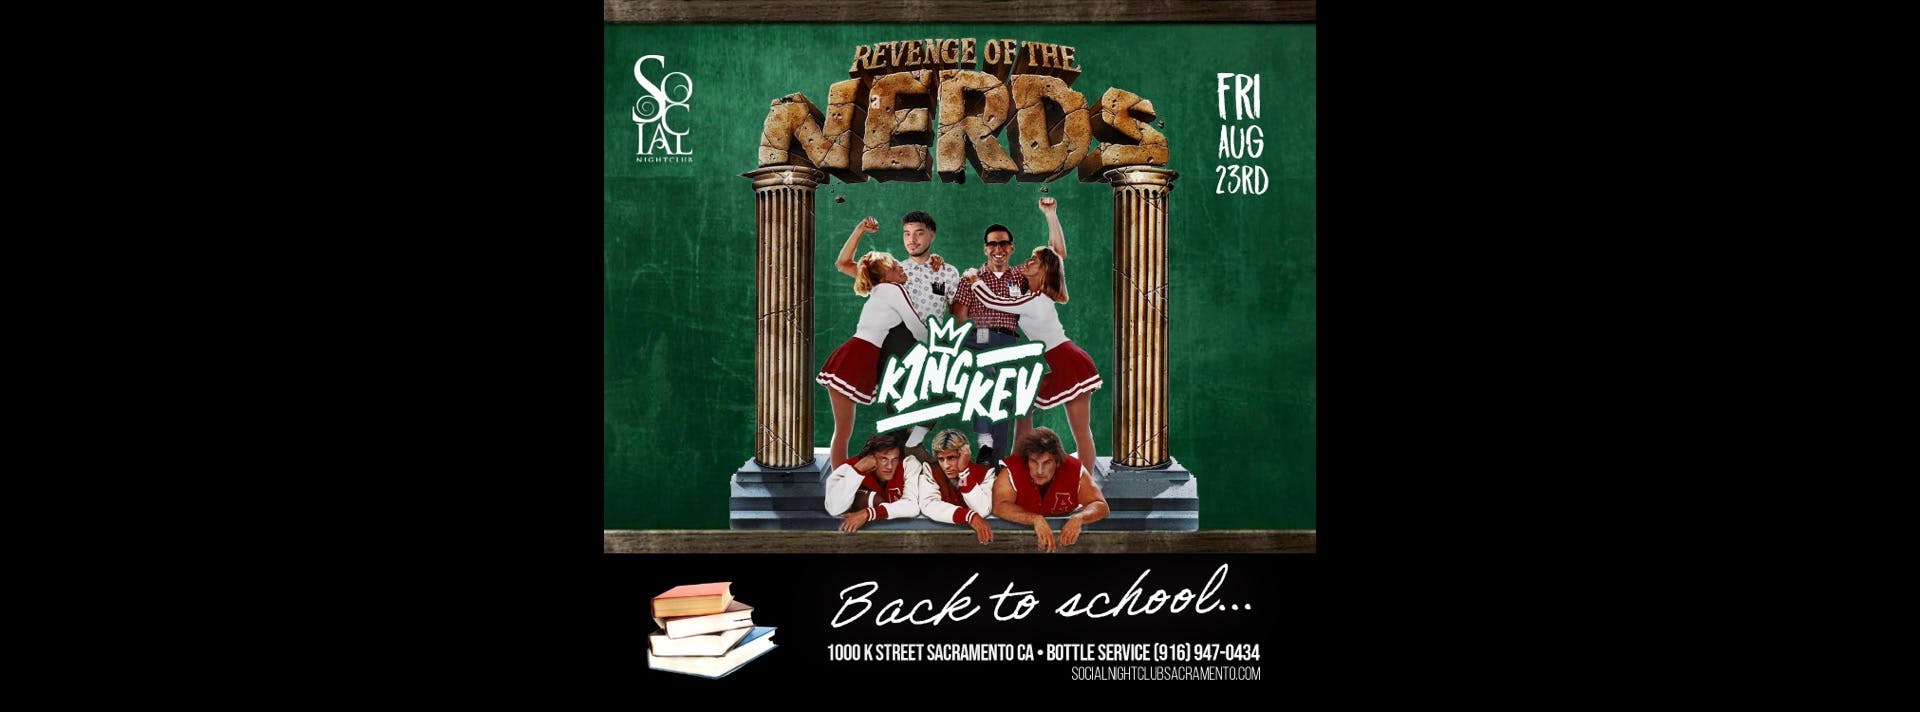 Revenge of the NERDS (Back to School Edition) ft. Sac State own King Kev